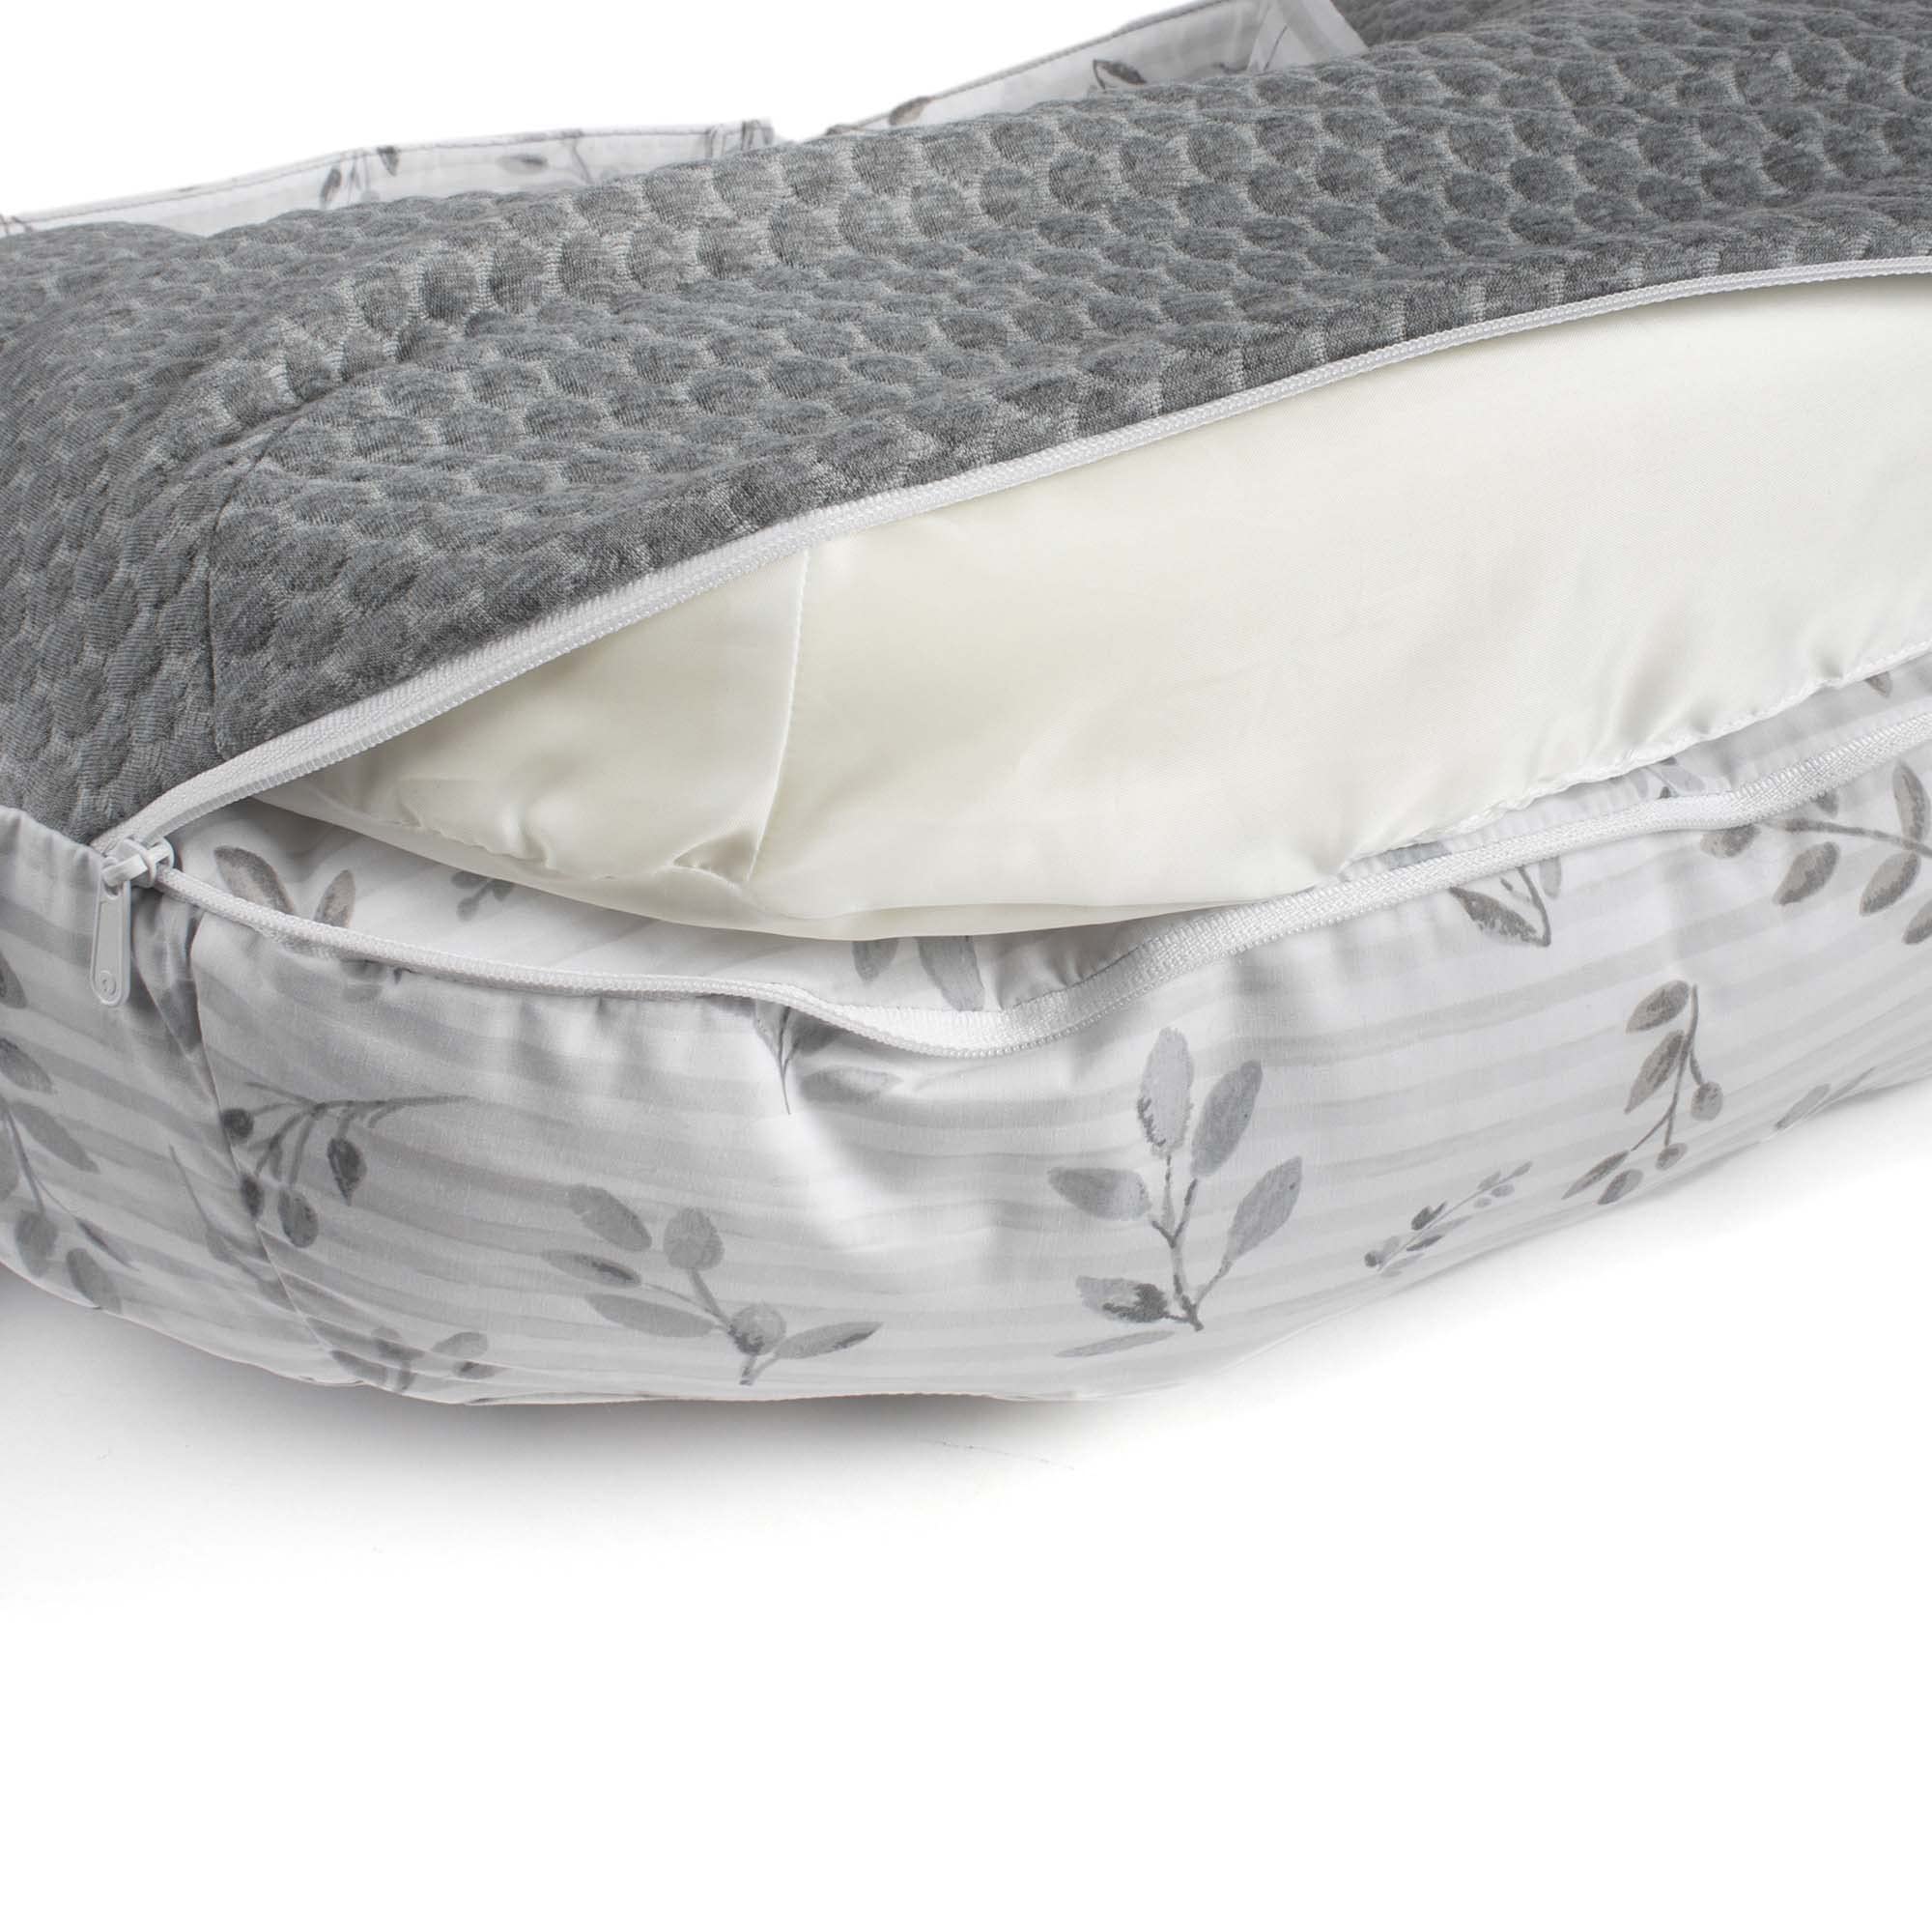 Boppy Best Latch Nursing Pillow, Gray Pennydot Leaf Stripe, Lactation Consultant Created, Firm Contoured and Plush Sides for Breastfeeding Options, Padded Belt, Plus Sized to Petite, Machine Washable